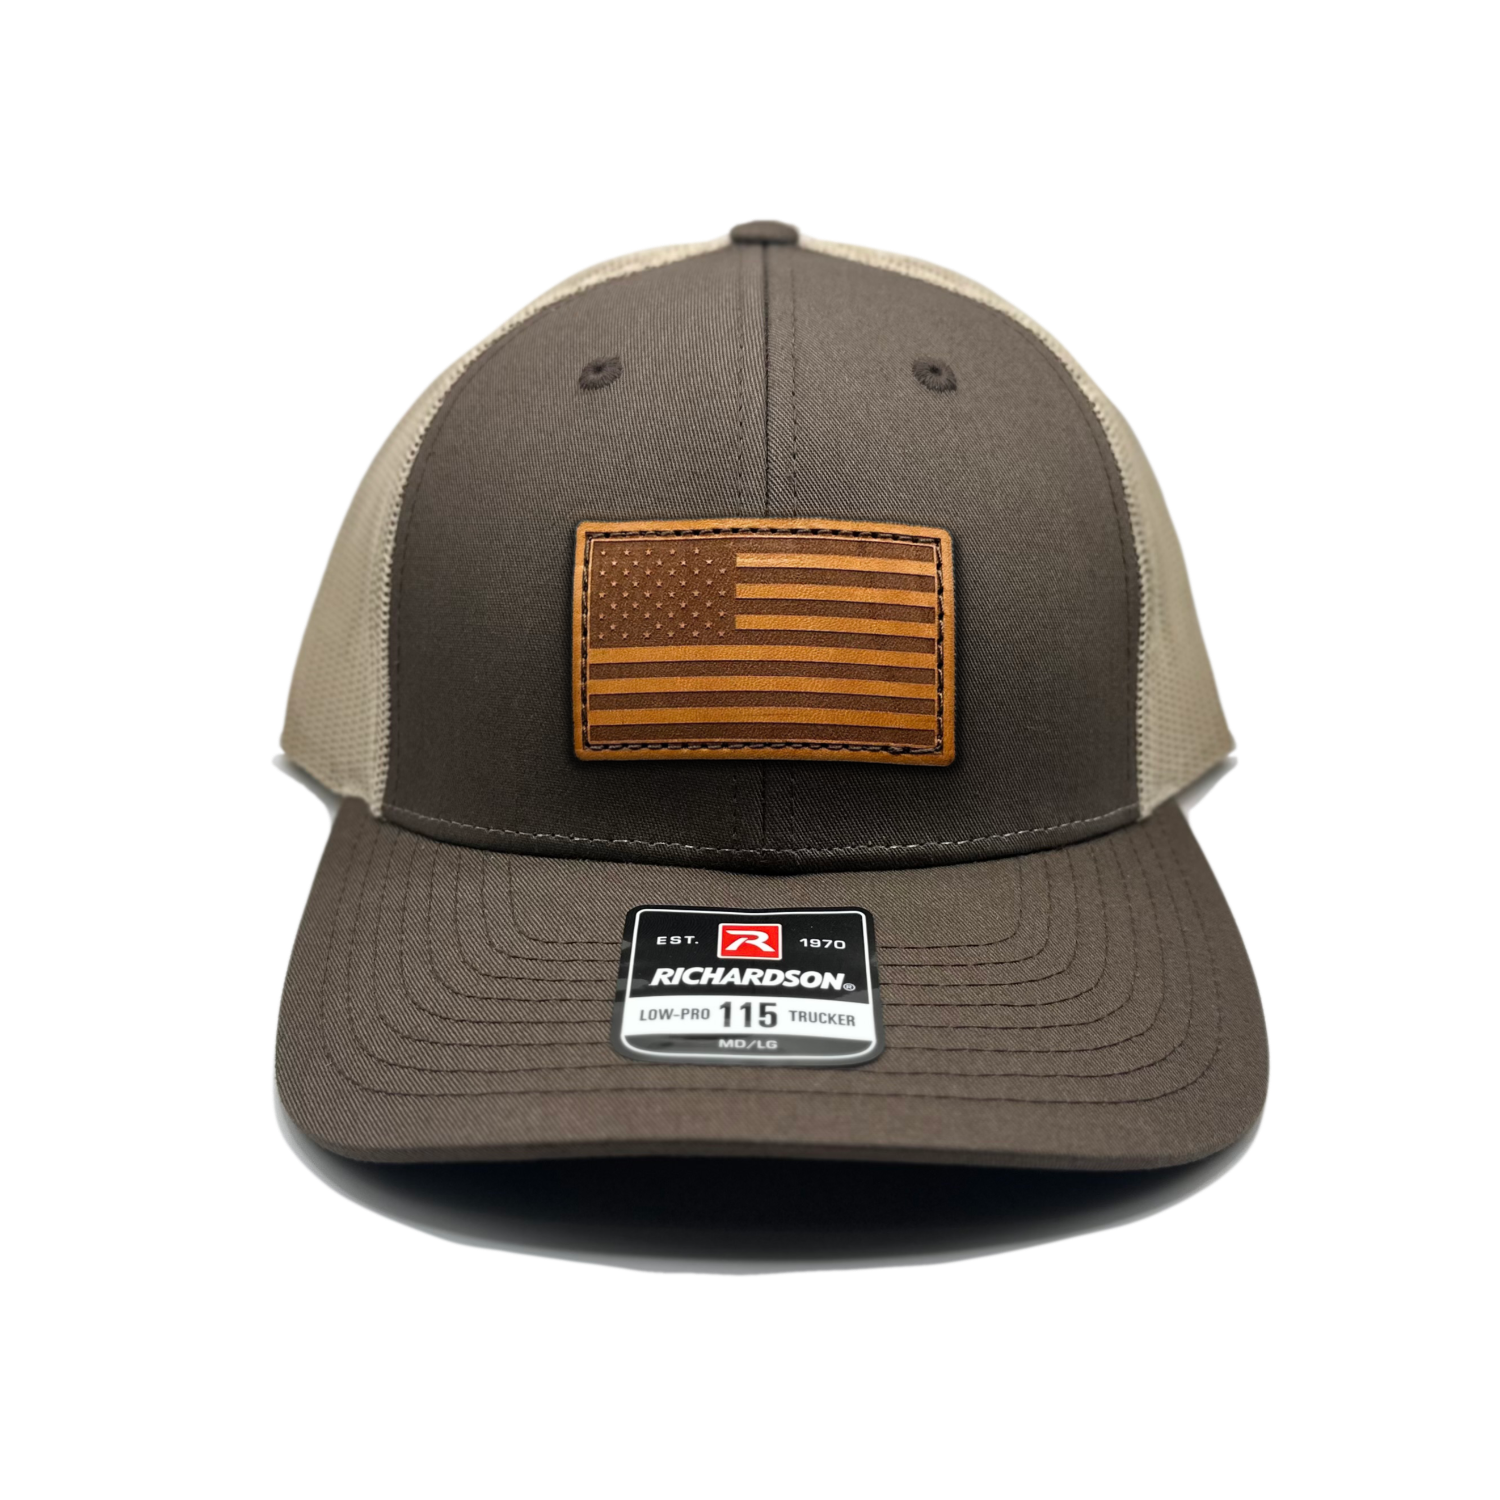 Image of a Brown/Khaki Richardson 115 hat with an American flag patch made of genuine leather, laser engraved and securely sewn onto the hat. The low profile trucker style hat is adjustable to fit small or M/L sizes, offering a versatile and fashionable accessory for any occasion."